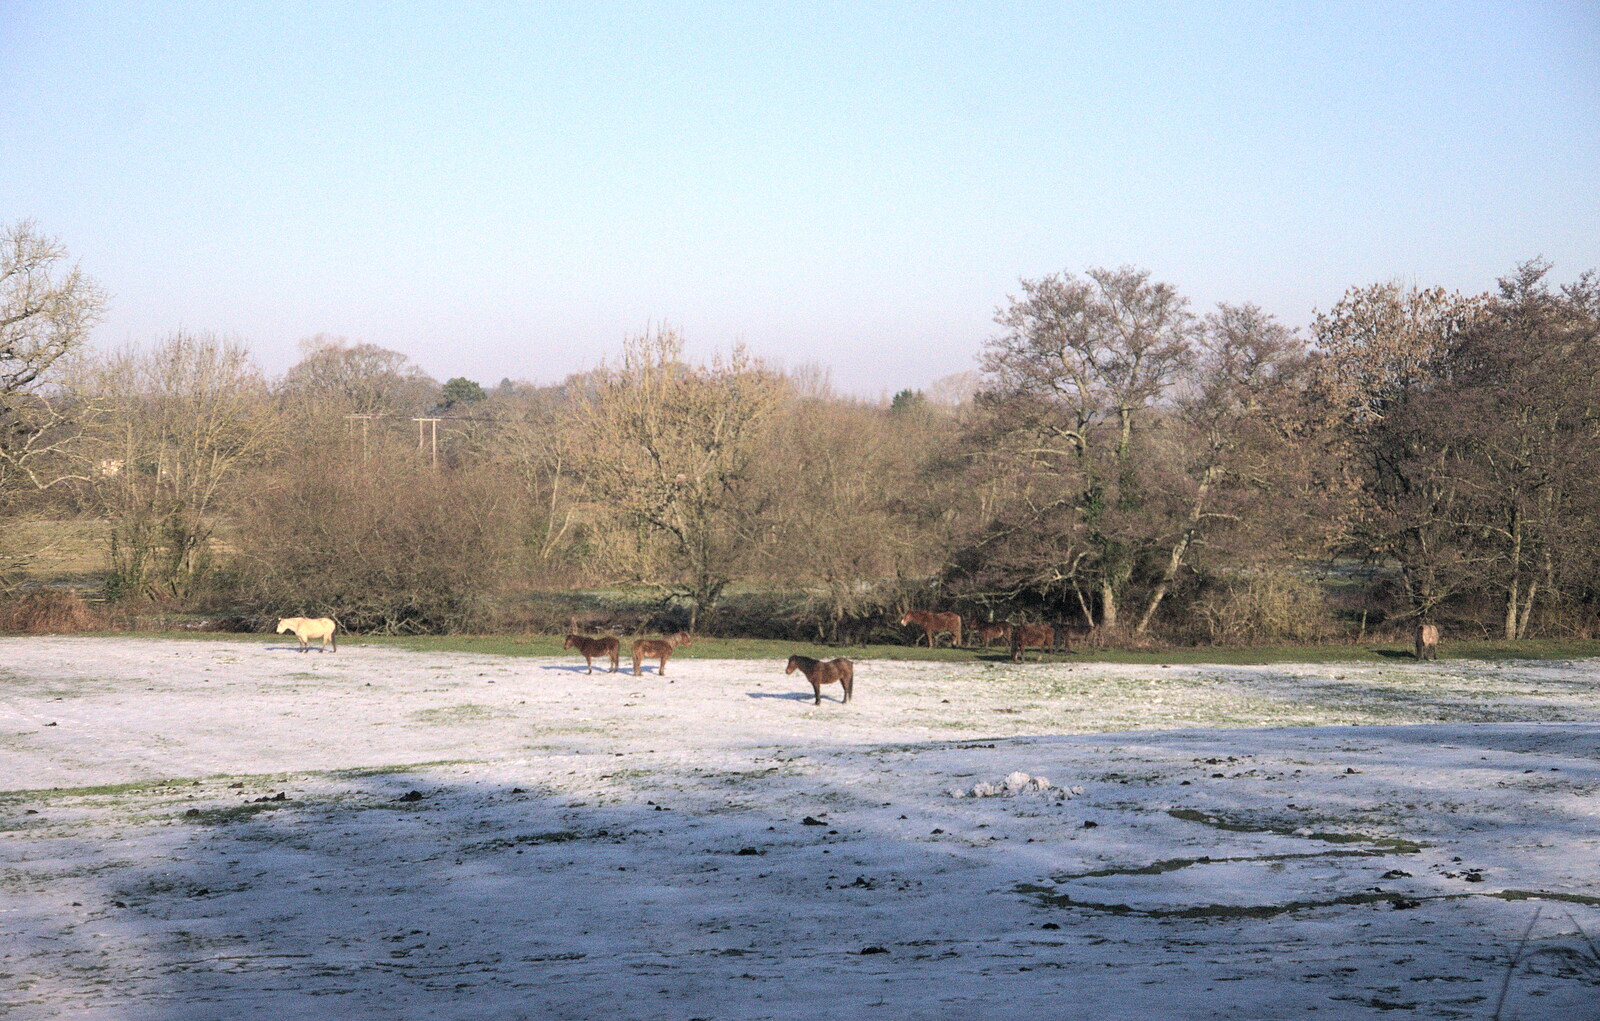 New Forest ponies in the snow from A Wintry Trip Down South, Walkford, Dorset - 1st February 2019